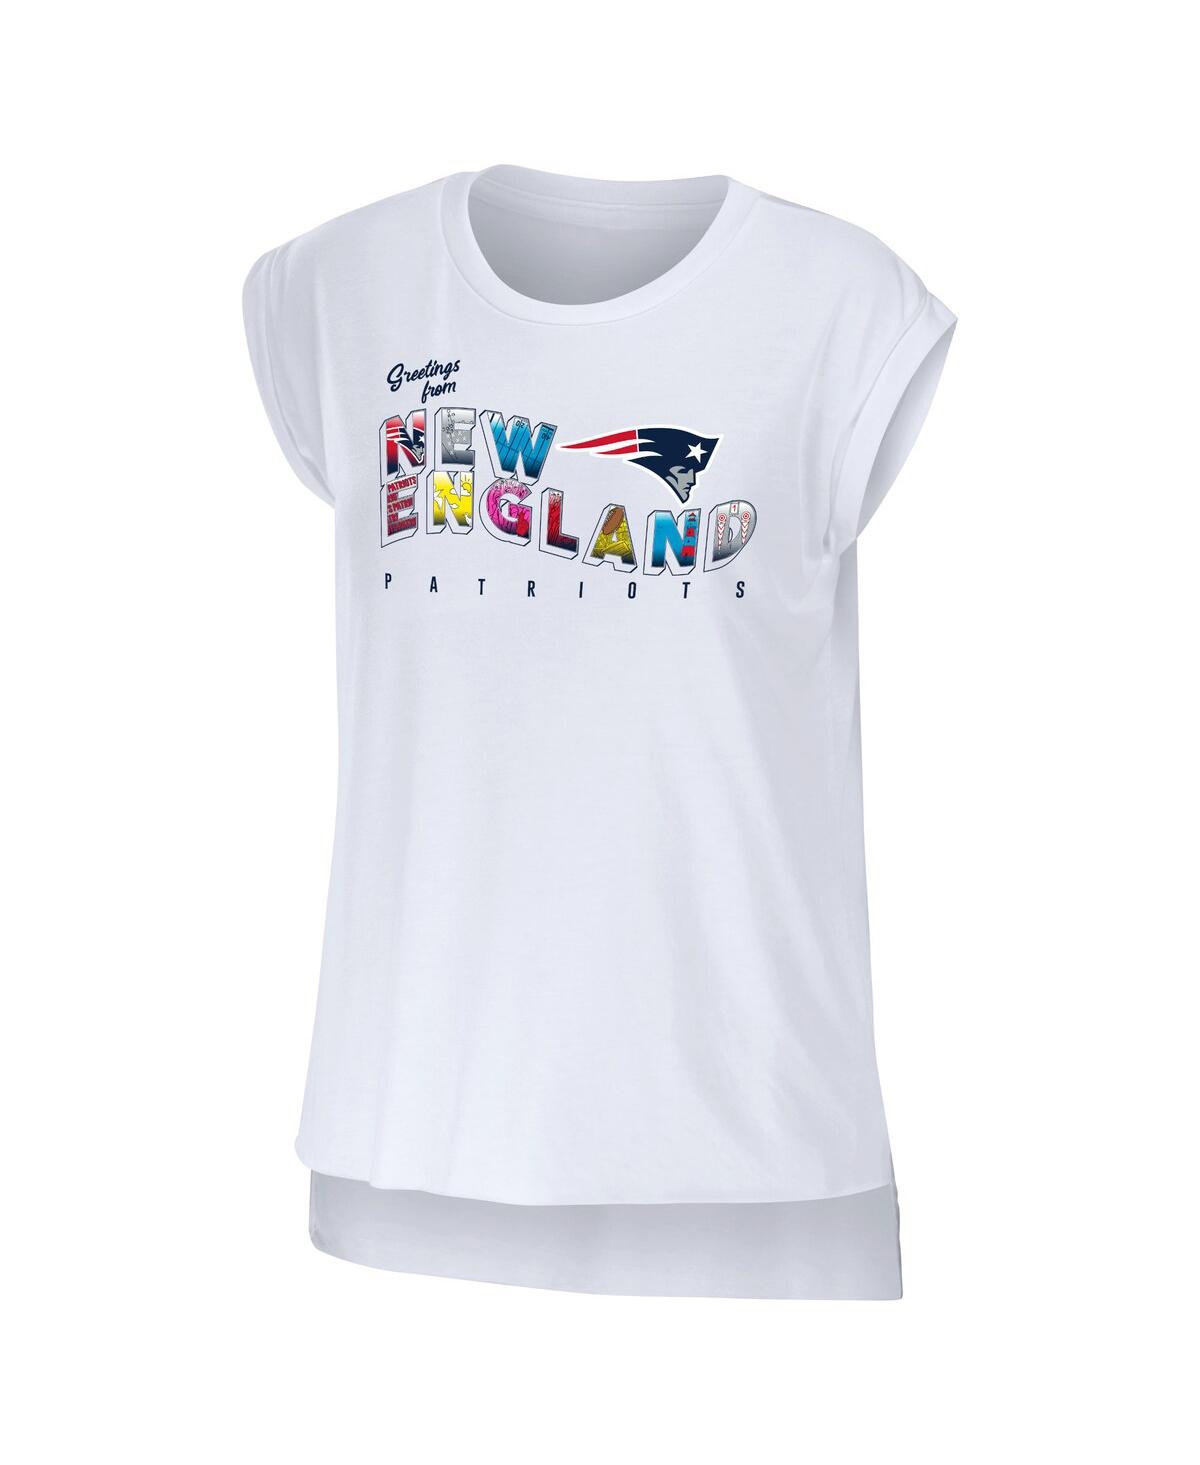 Shop Wear By Erin Andrews Women's  White New England Patriots Greetings From Muscle T-shirt